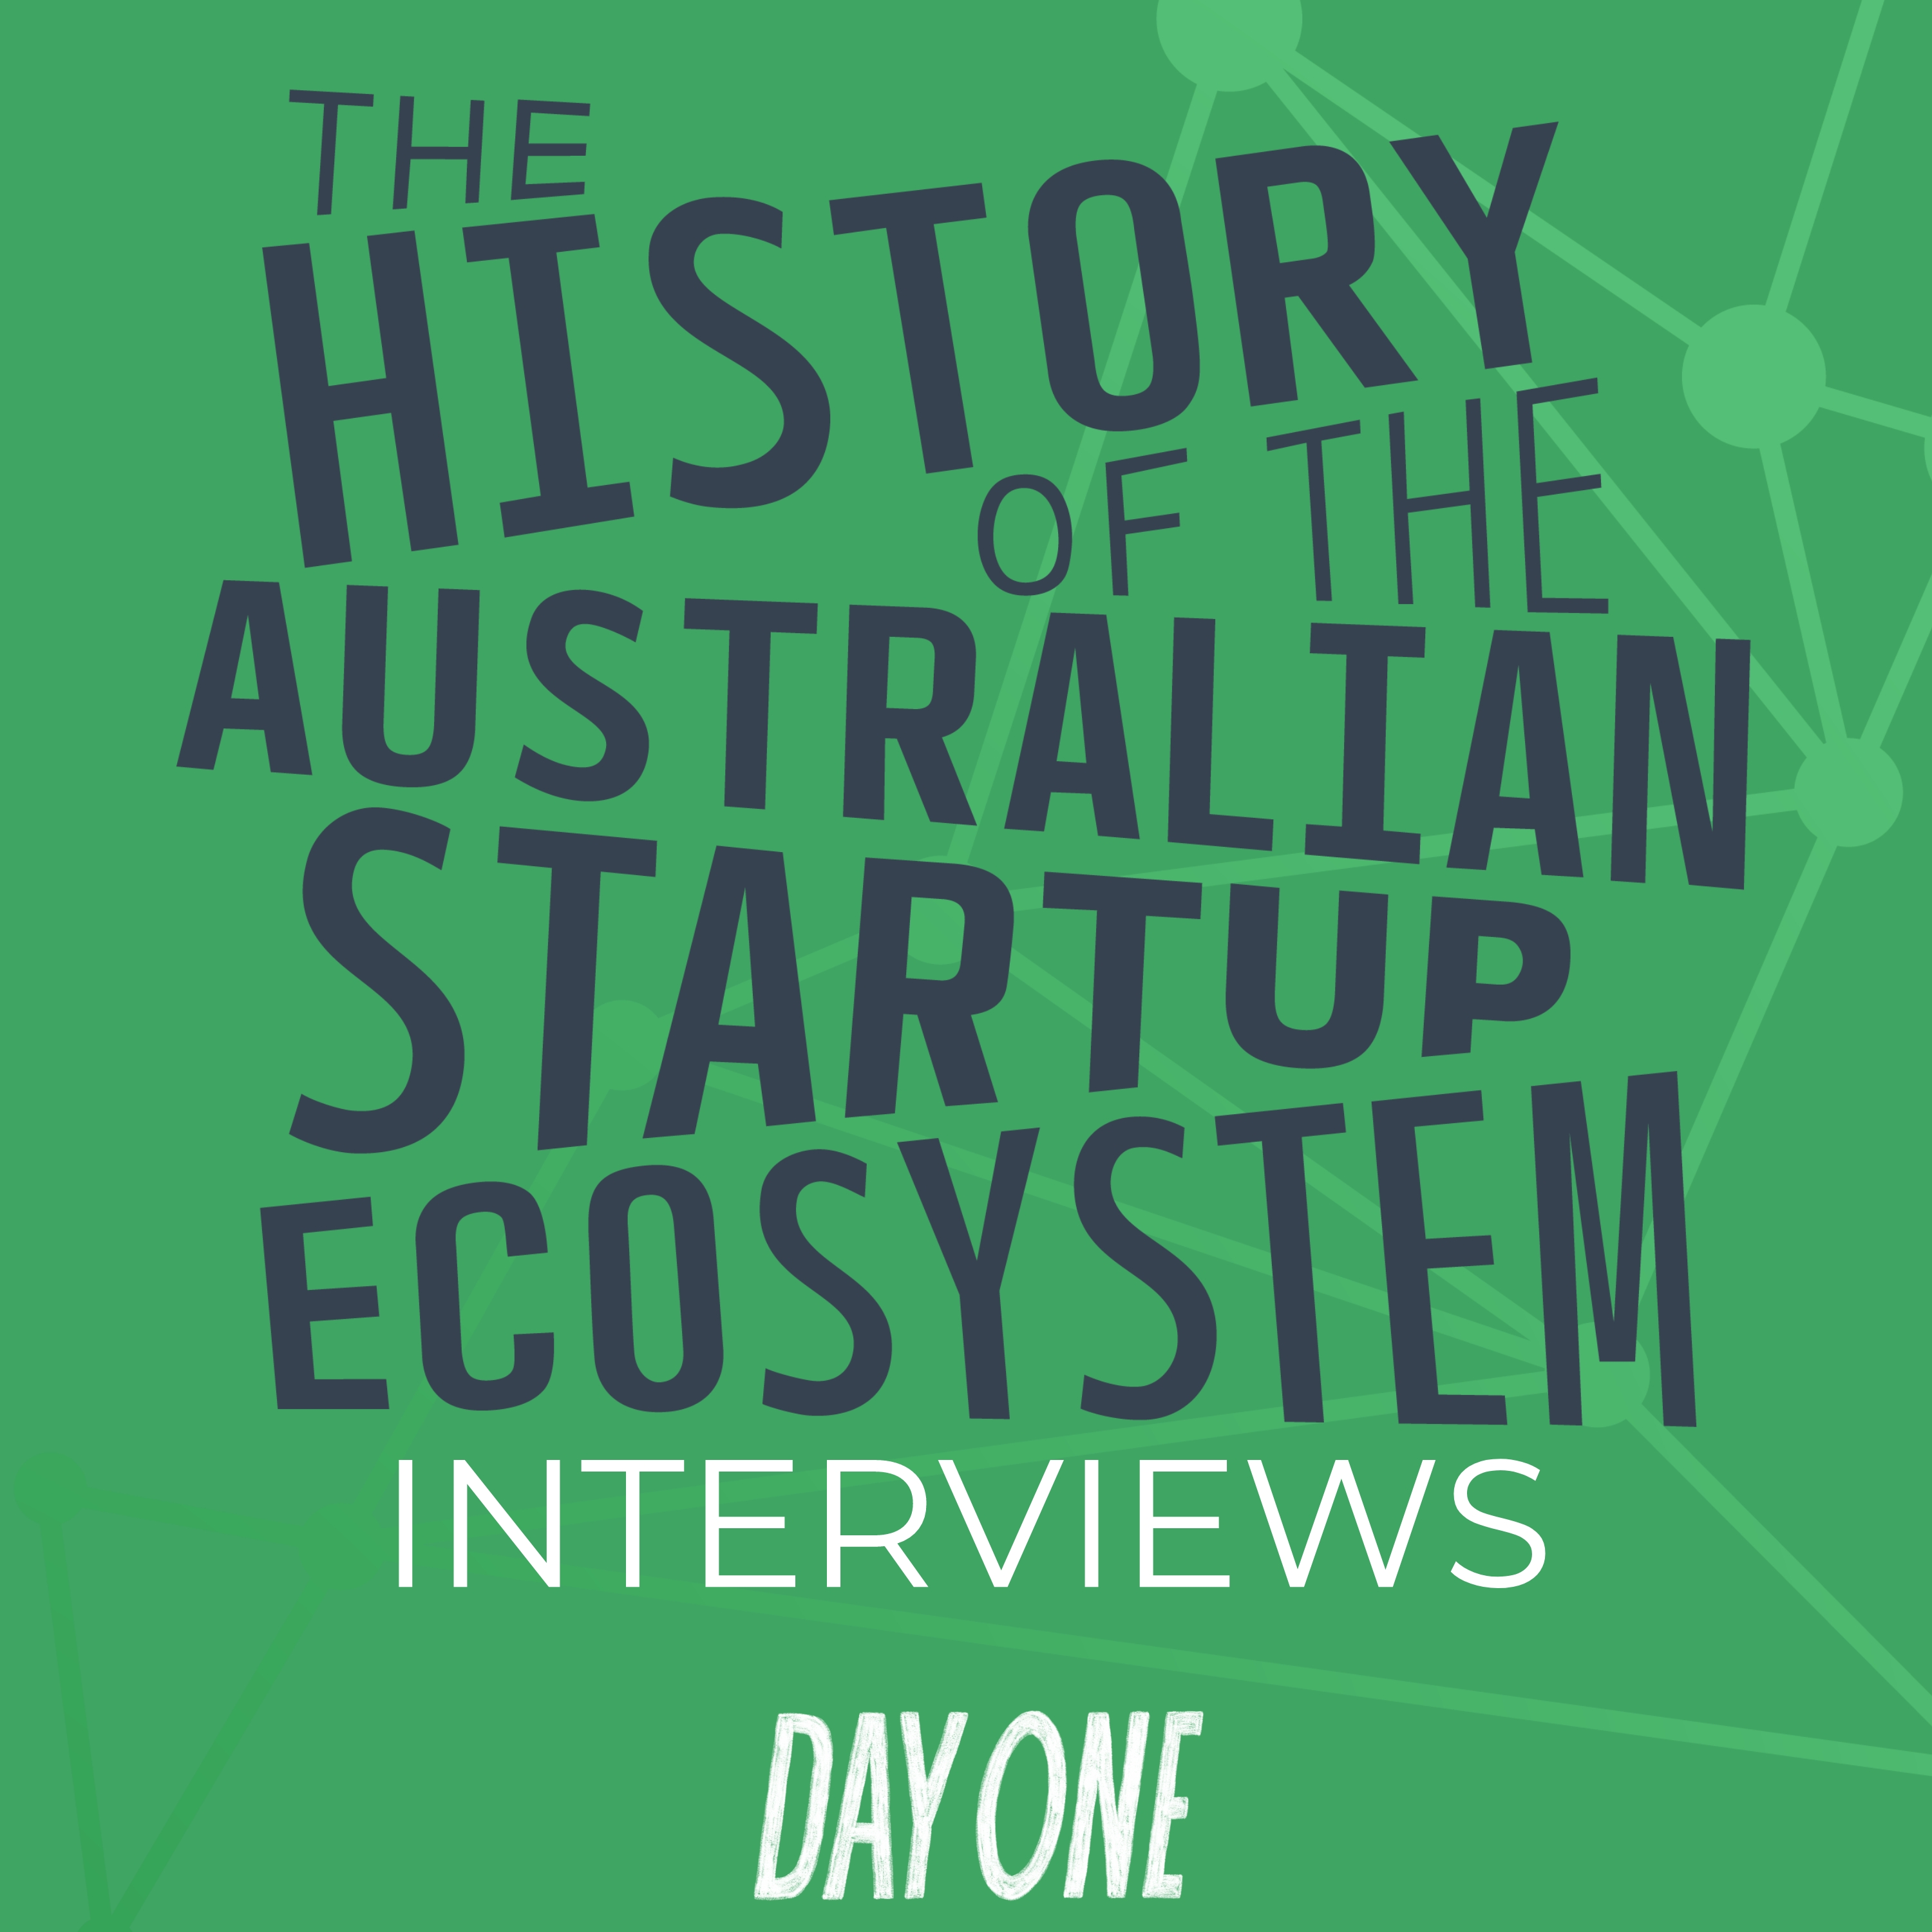 Ashley Baxter discusses how UQ Ventures was invaluable for her startup